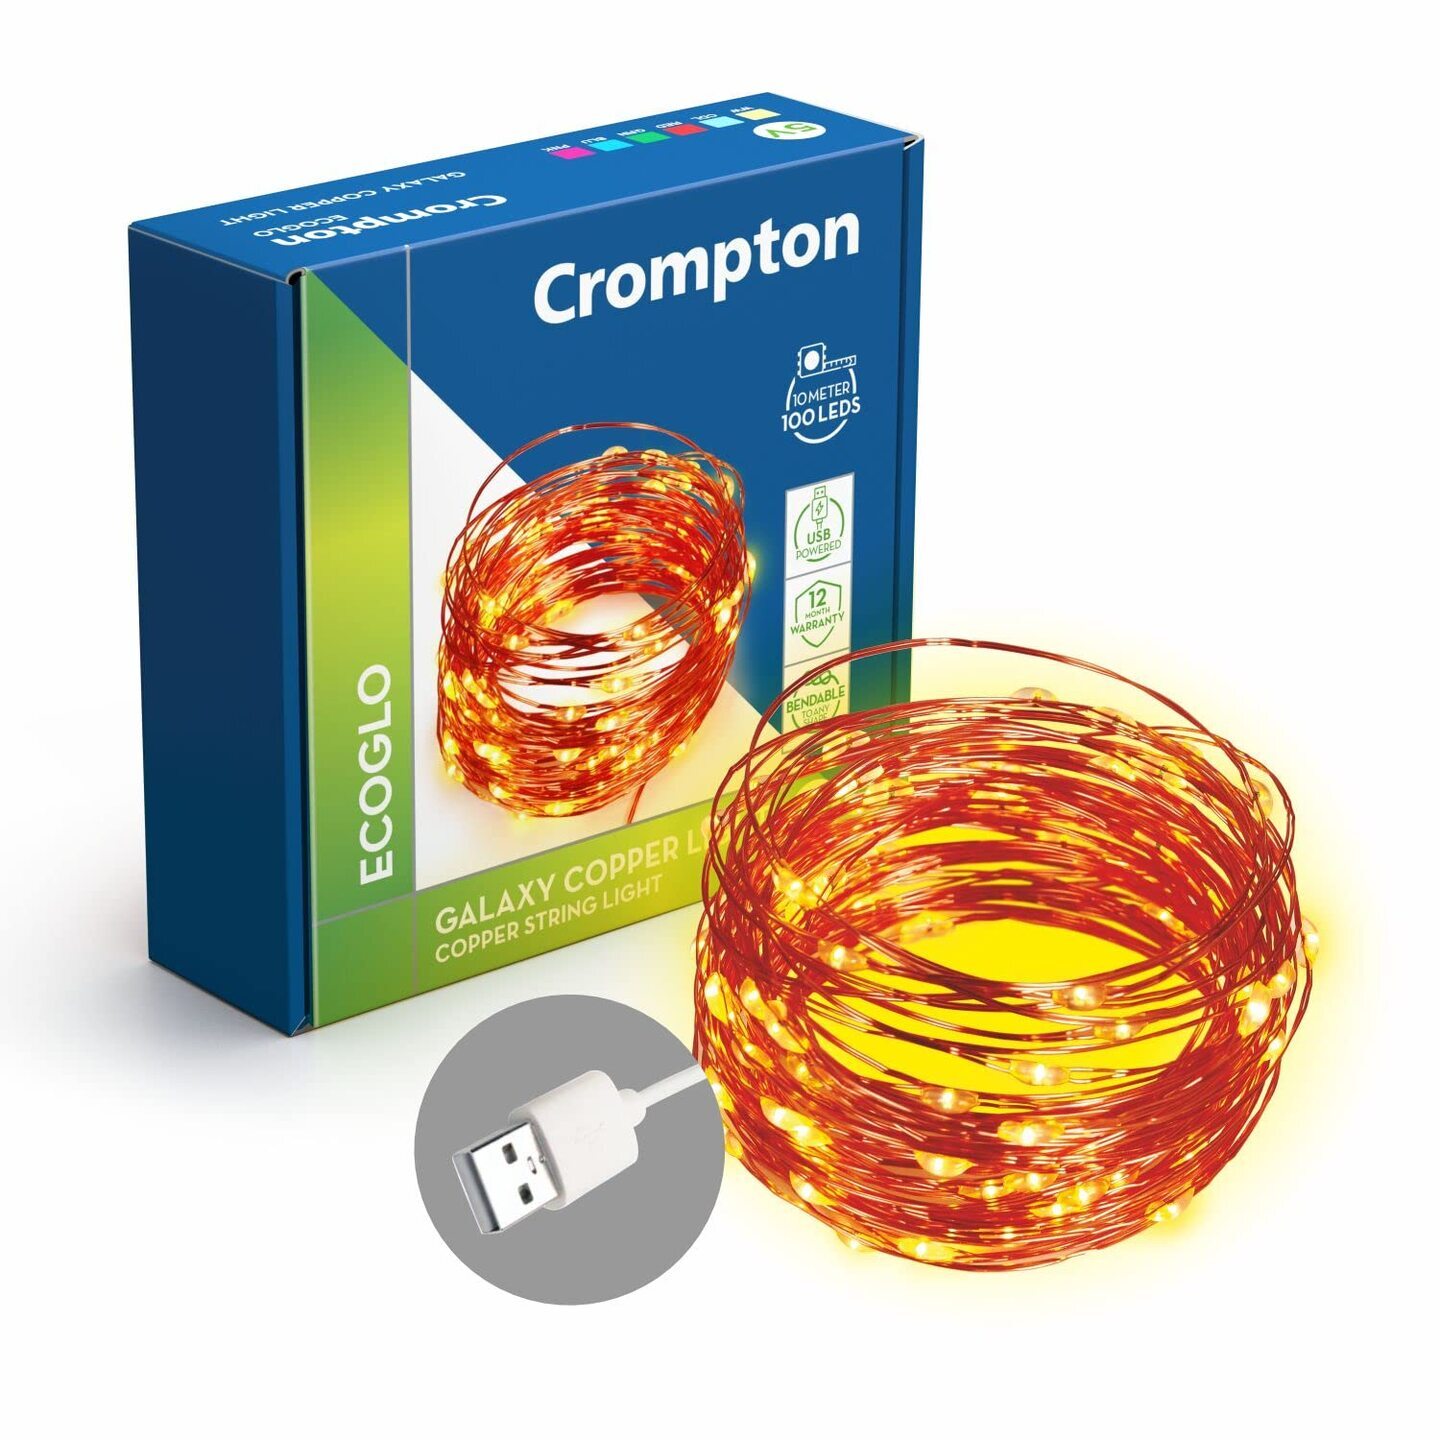 Crompton Galaxy Copper USB Powered String Fairy Lights (10 Meters - Warm White)